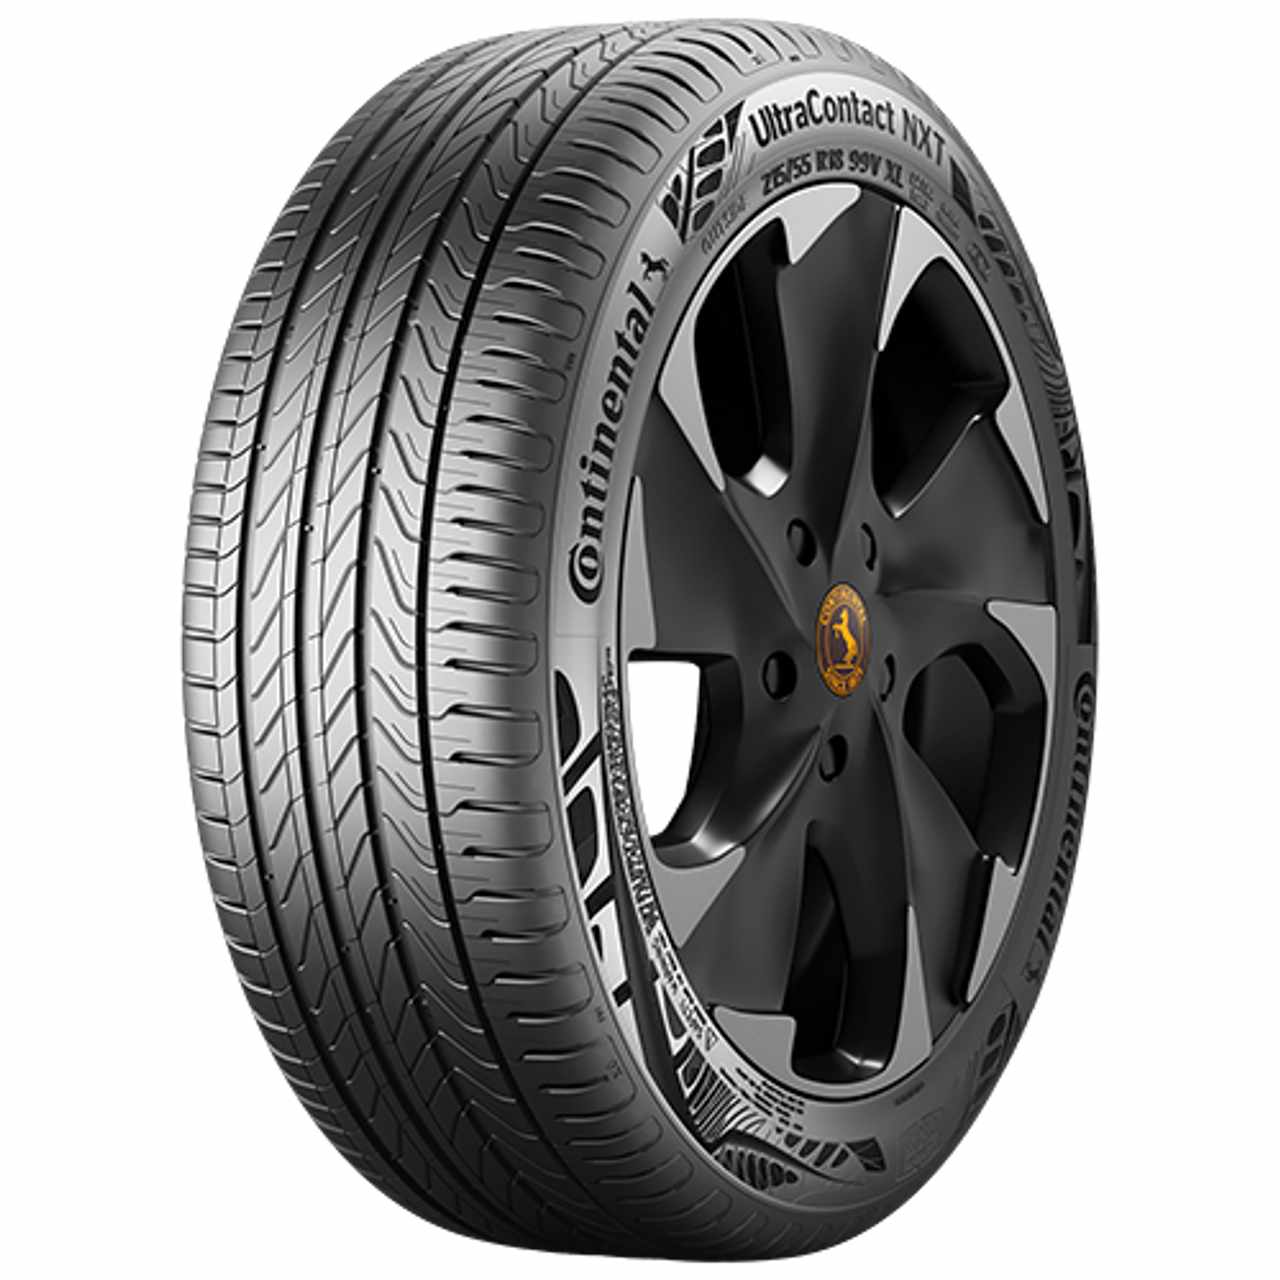 CONTINENTAL ULTRACONTACT NXT (EVc) 235/55R18 104W FR BSW von Continental